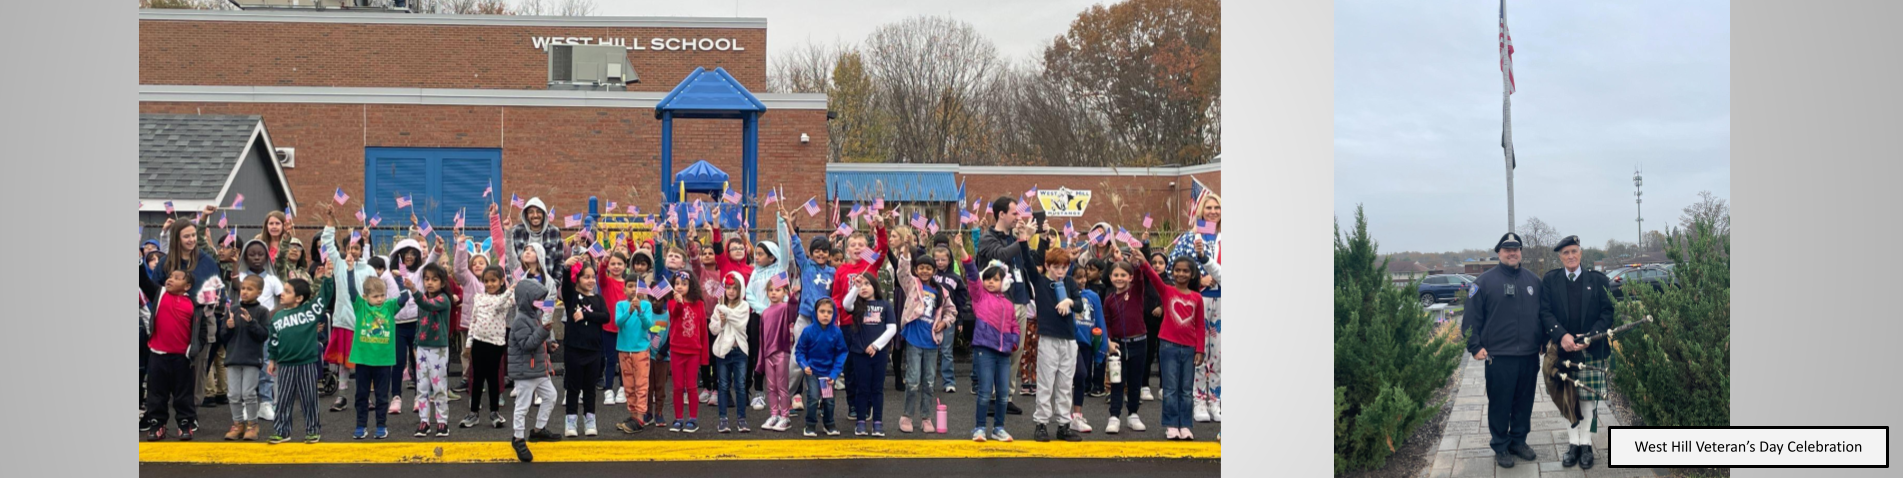 Students waving American flags in celebration of Veterans Day!